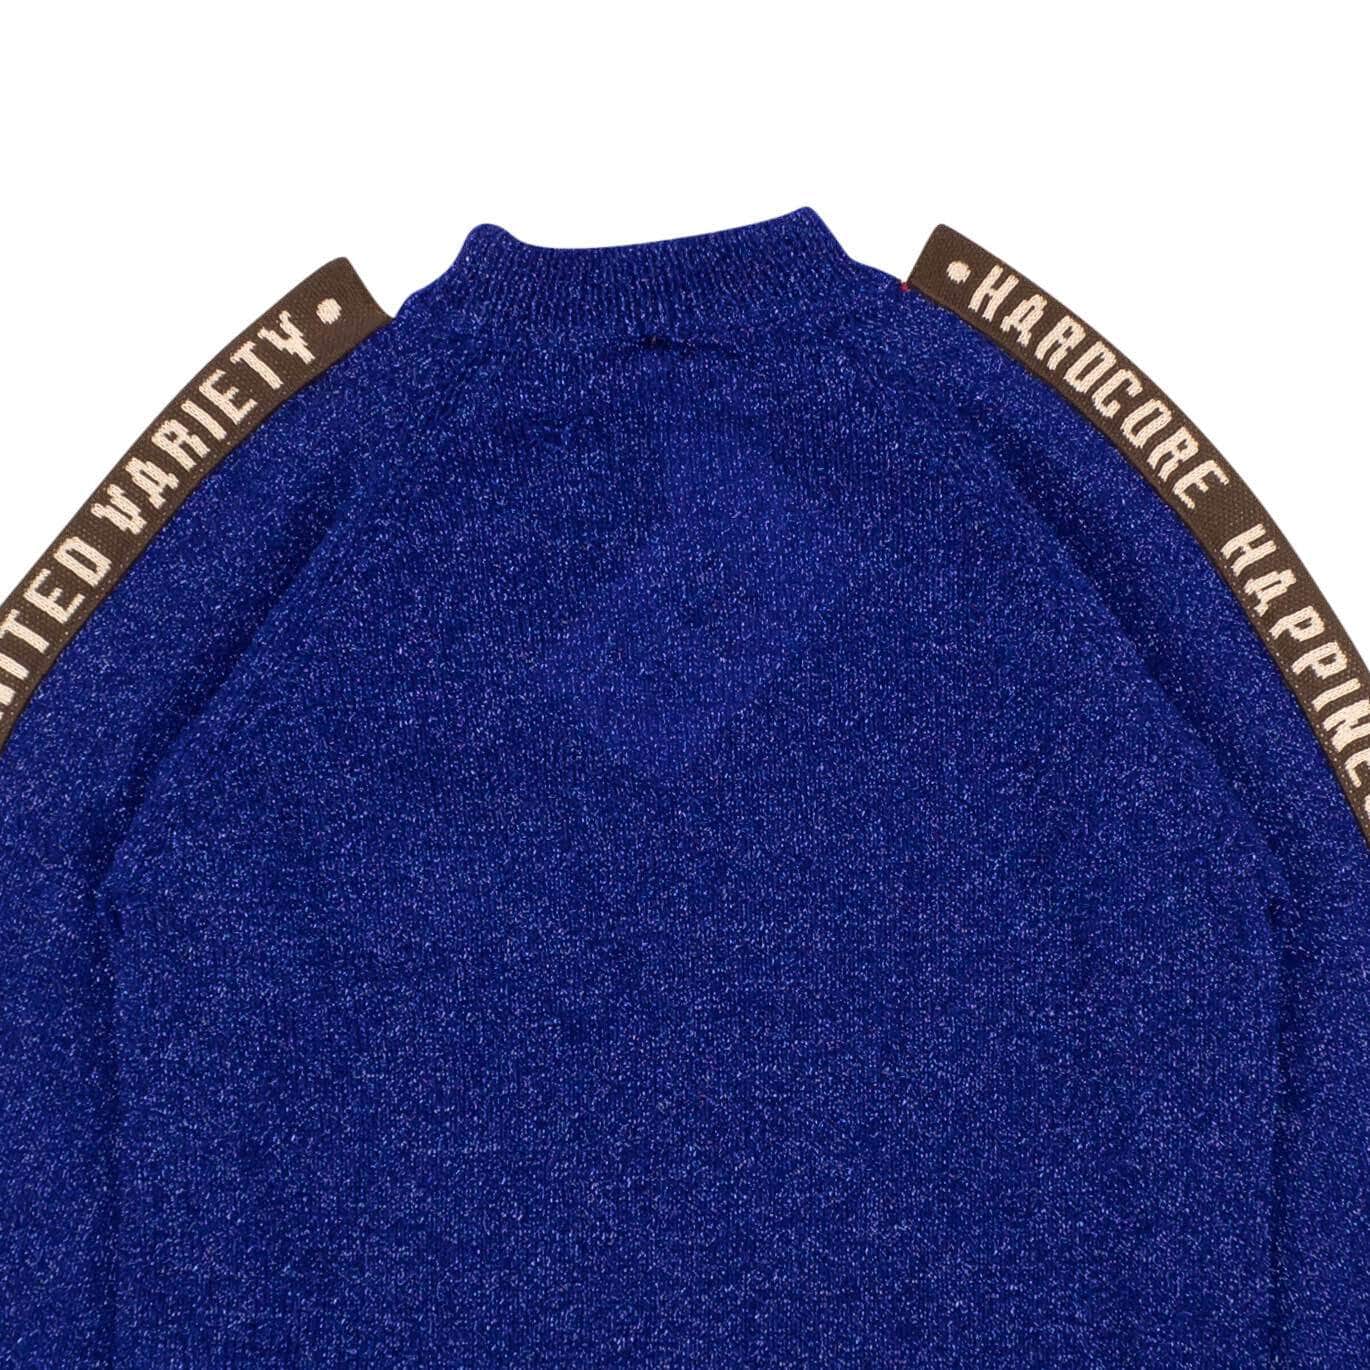 Survival Of The Fashionest 250-500, channelenable-all, chicmi, couponcollection, gender-mens, main-clothing, mens-pullover-sweaters, mens-shoes, MixedApparel, size-m, size-s, survival-of-the-fashionest Blue Glitter Slogan Sweater